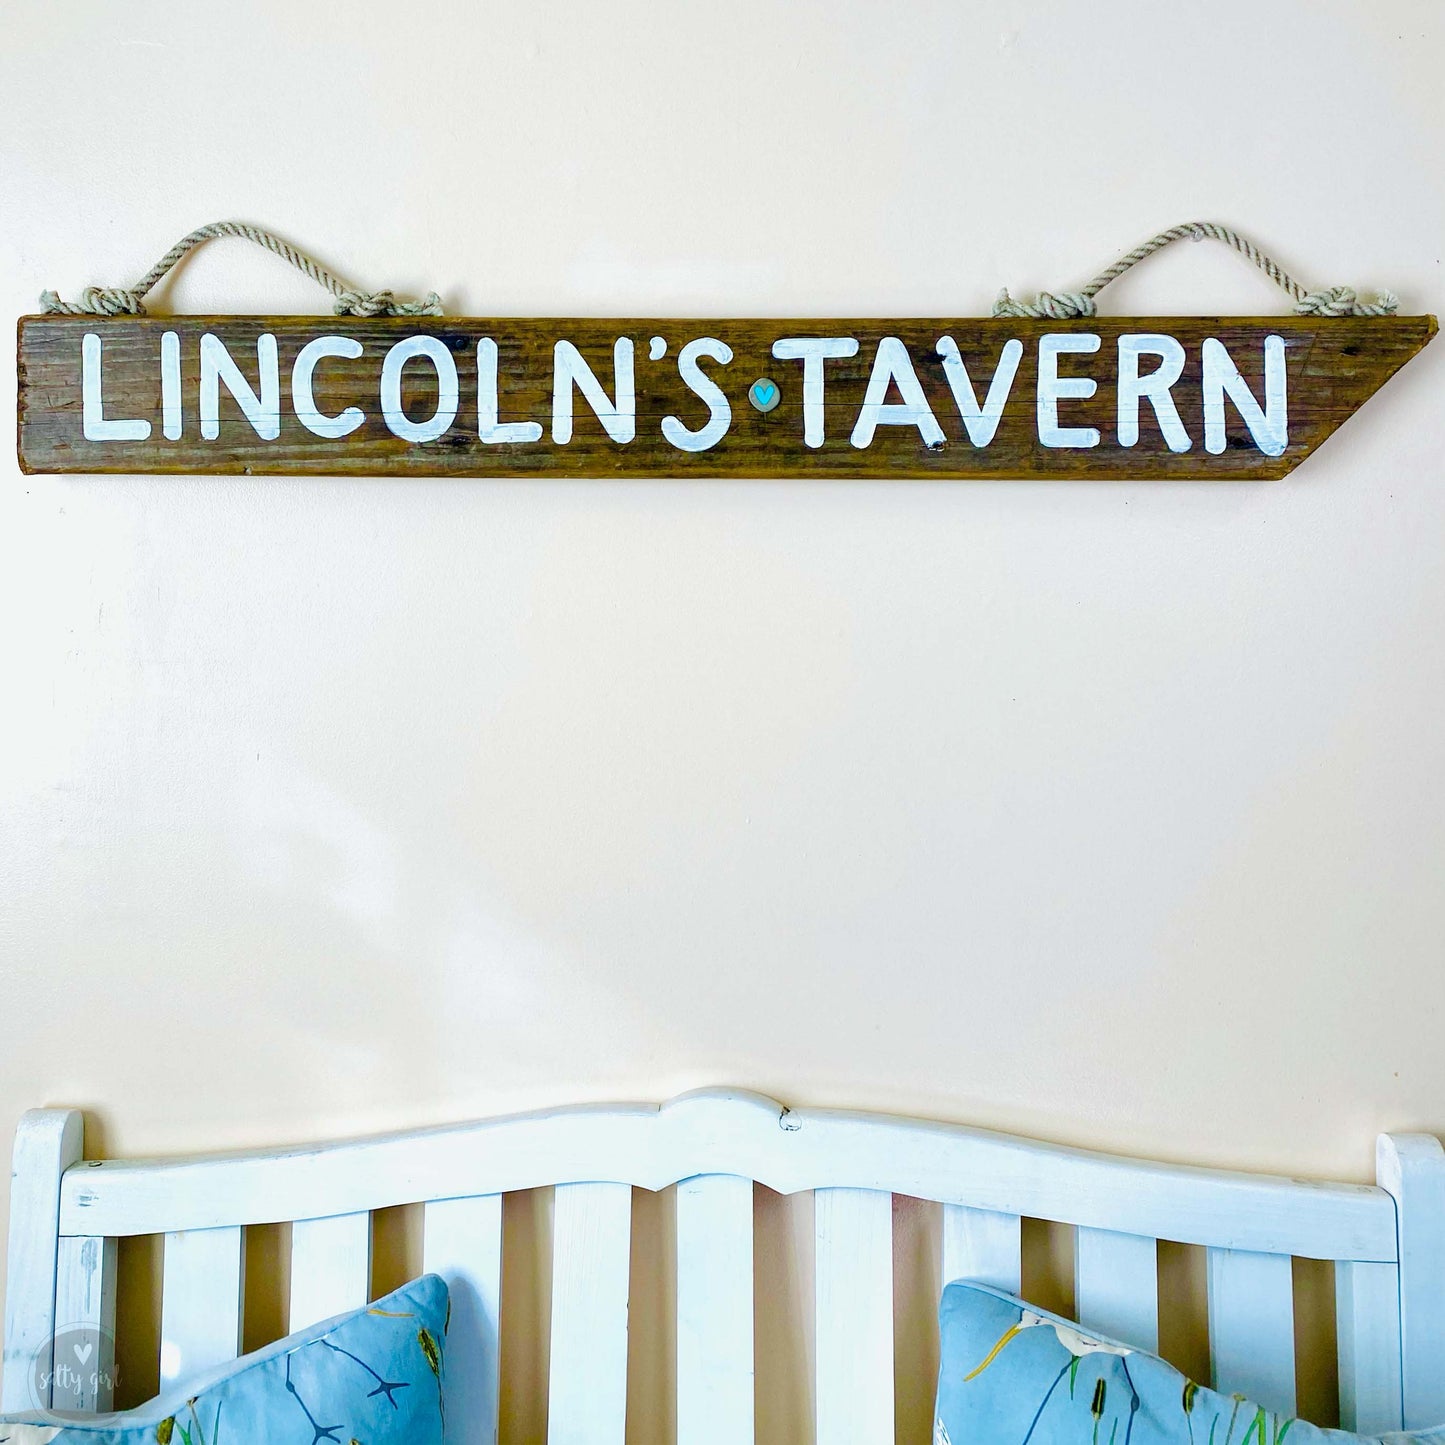 a wooden sign that says lincoln's tavern hanging on a wall